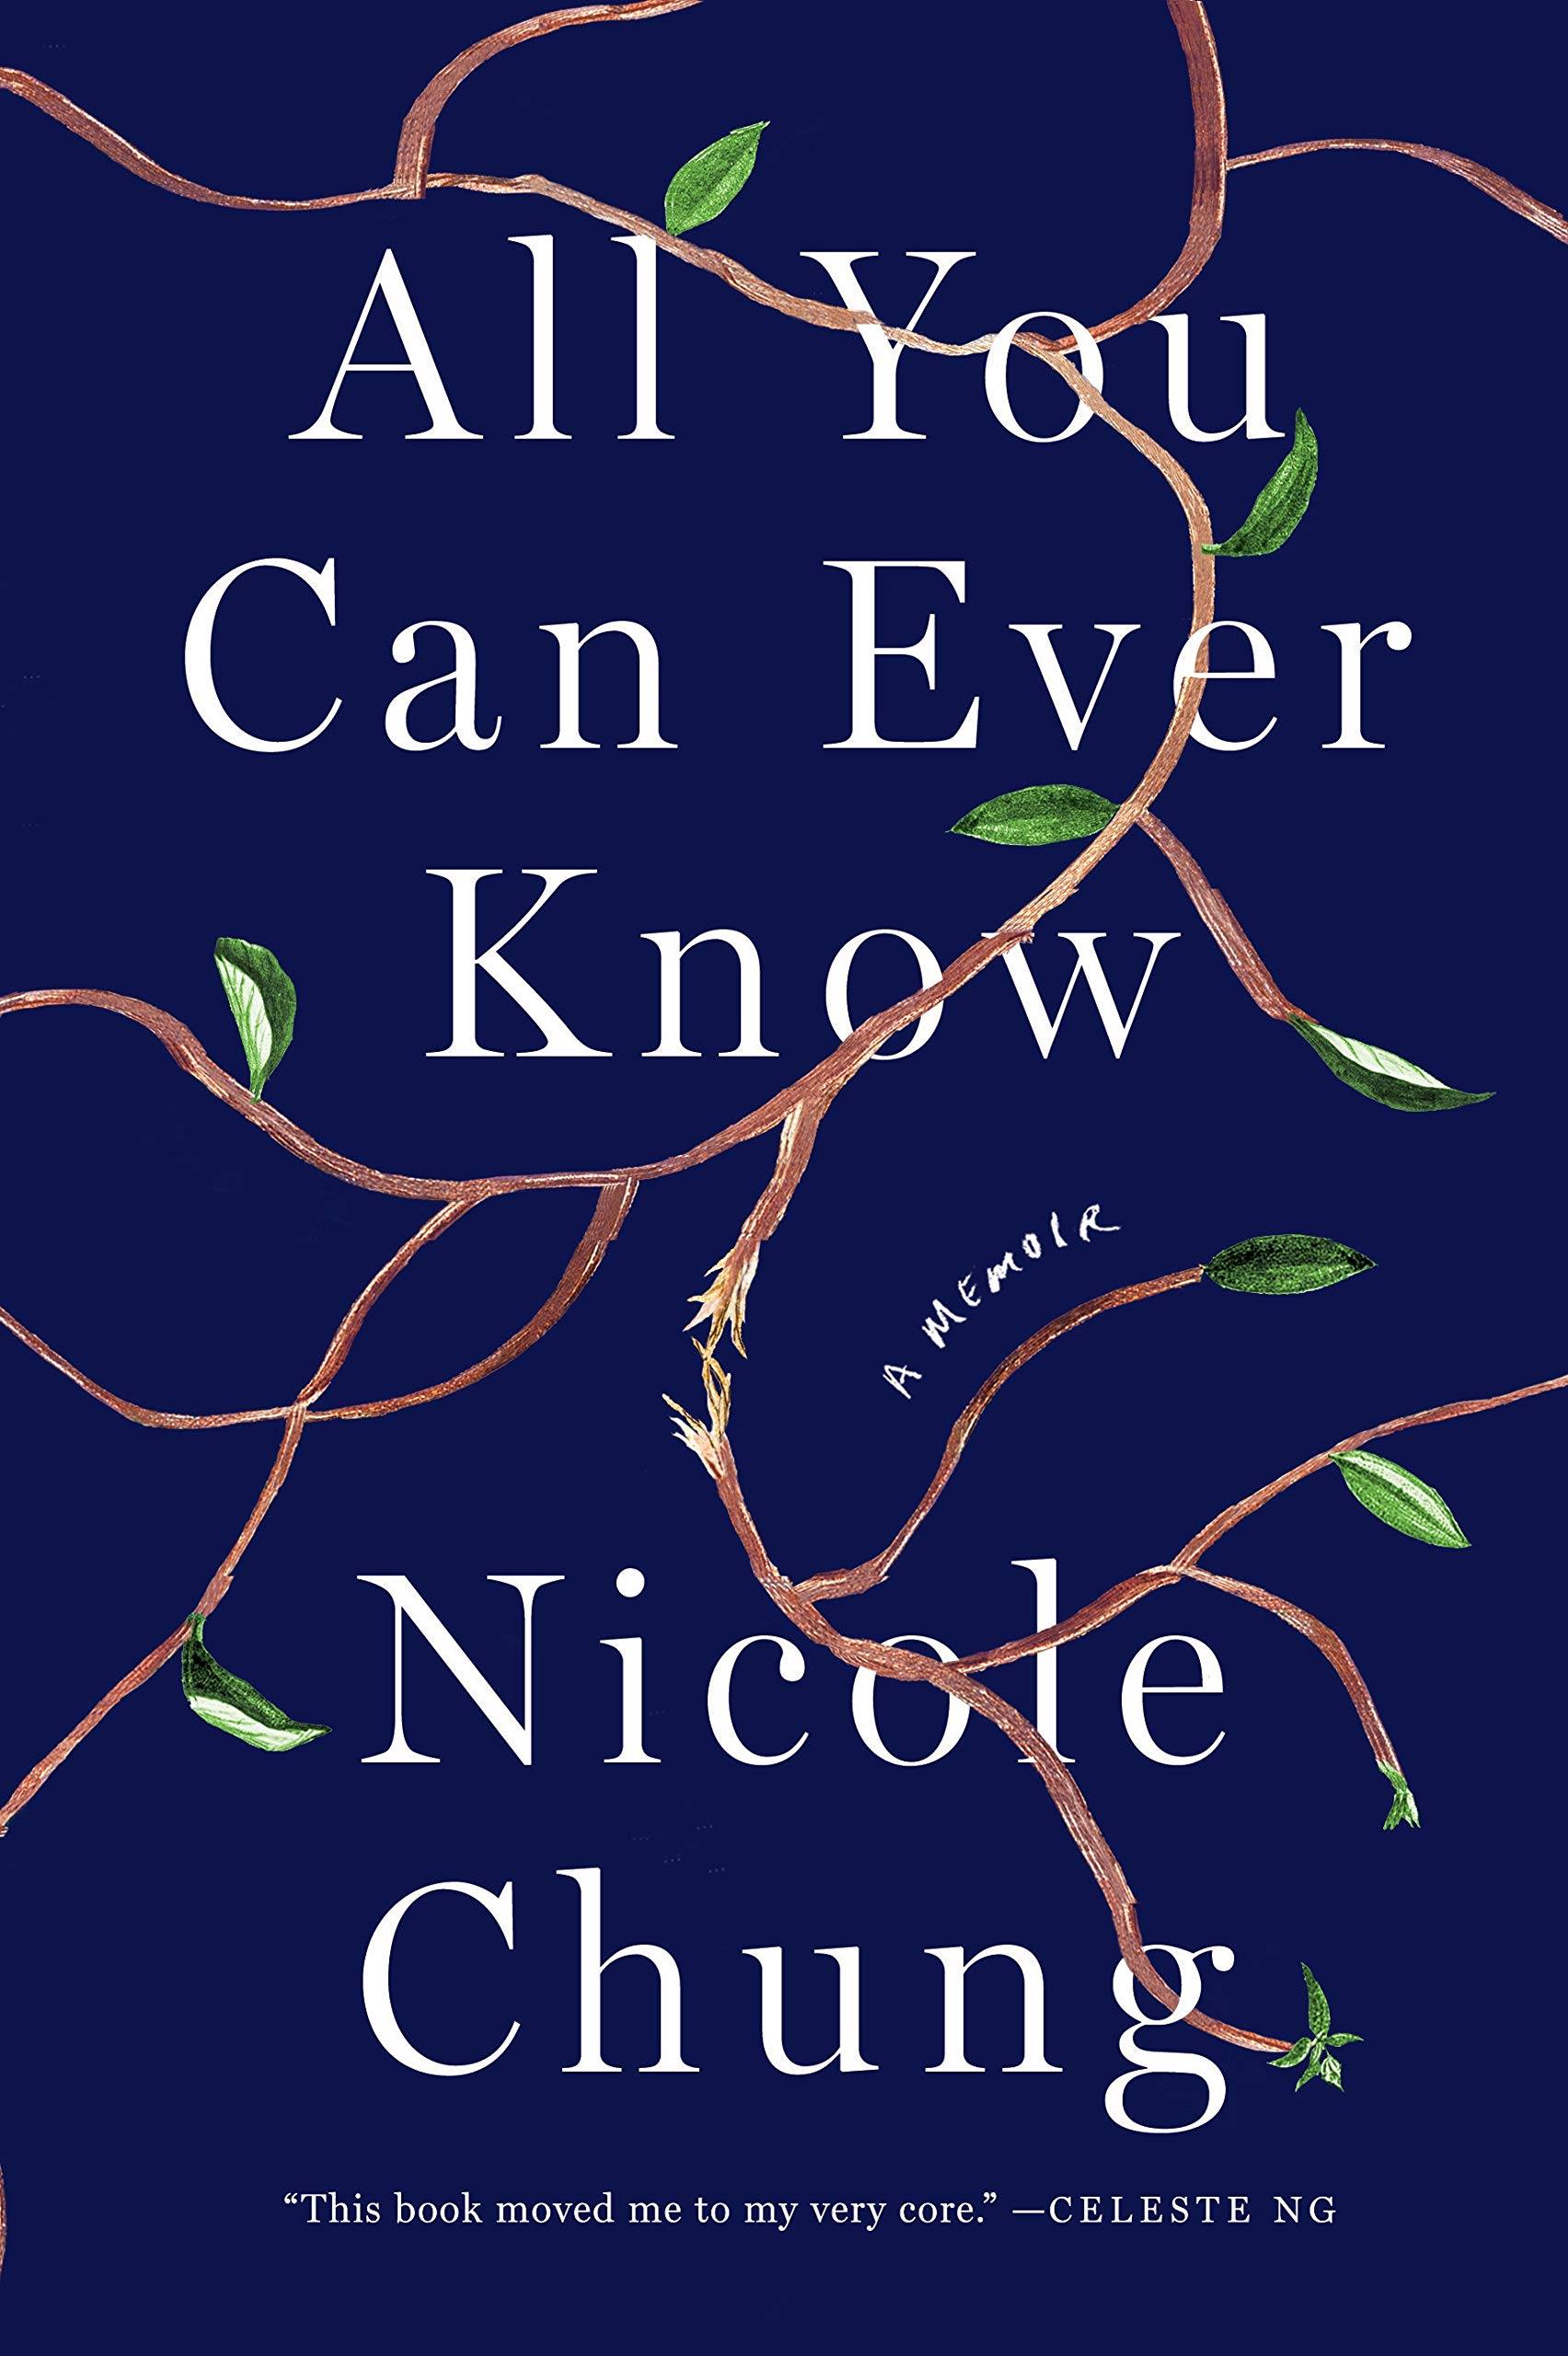 Blue "All You Can Ever Know" book cover featuring a leafy vine winding across the cover.